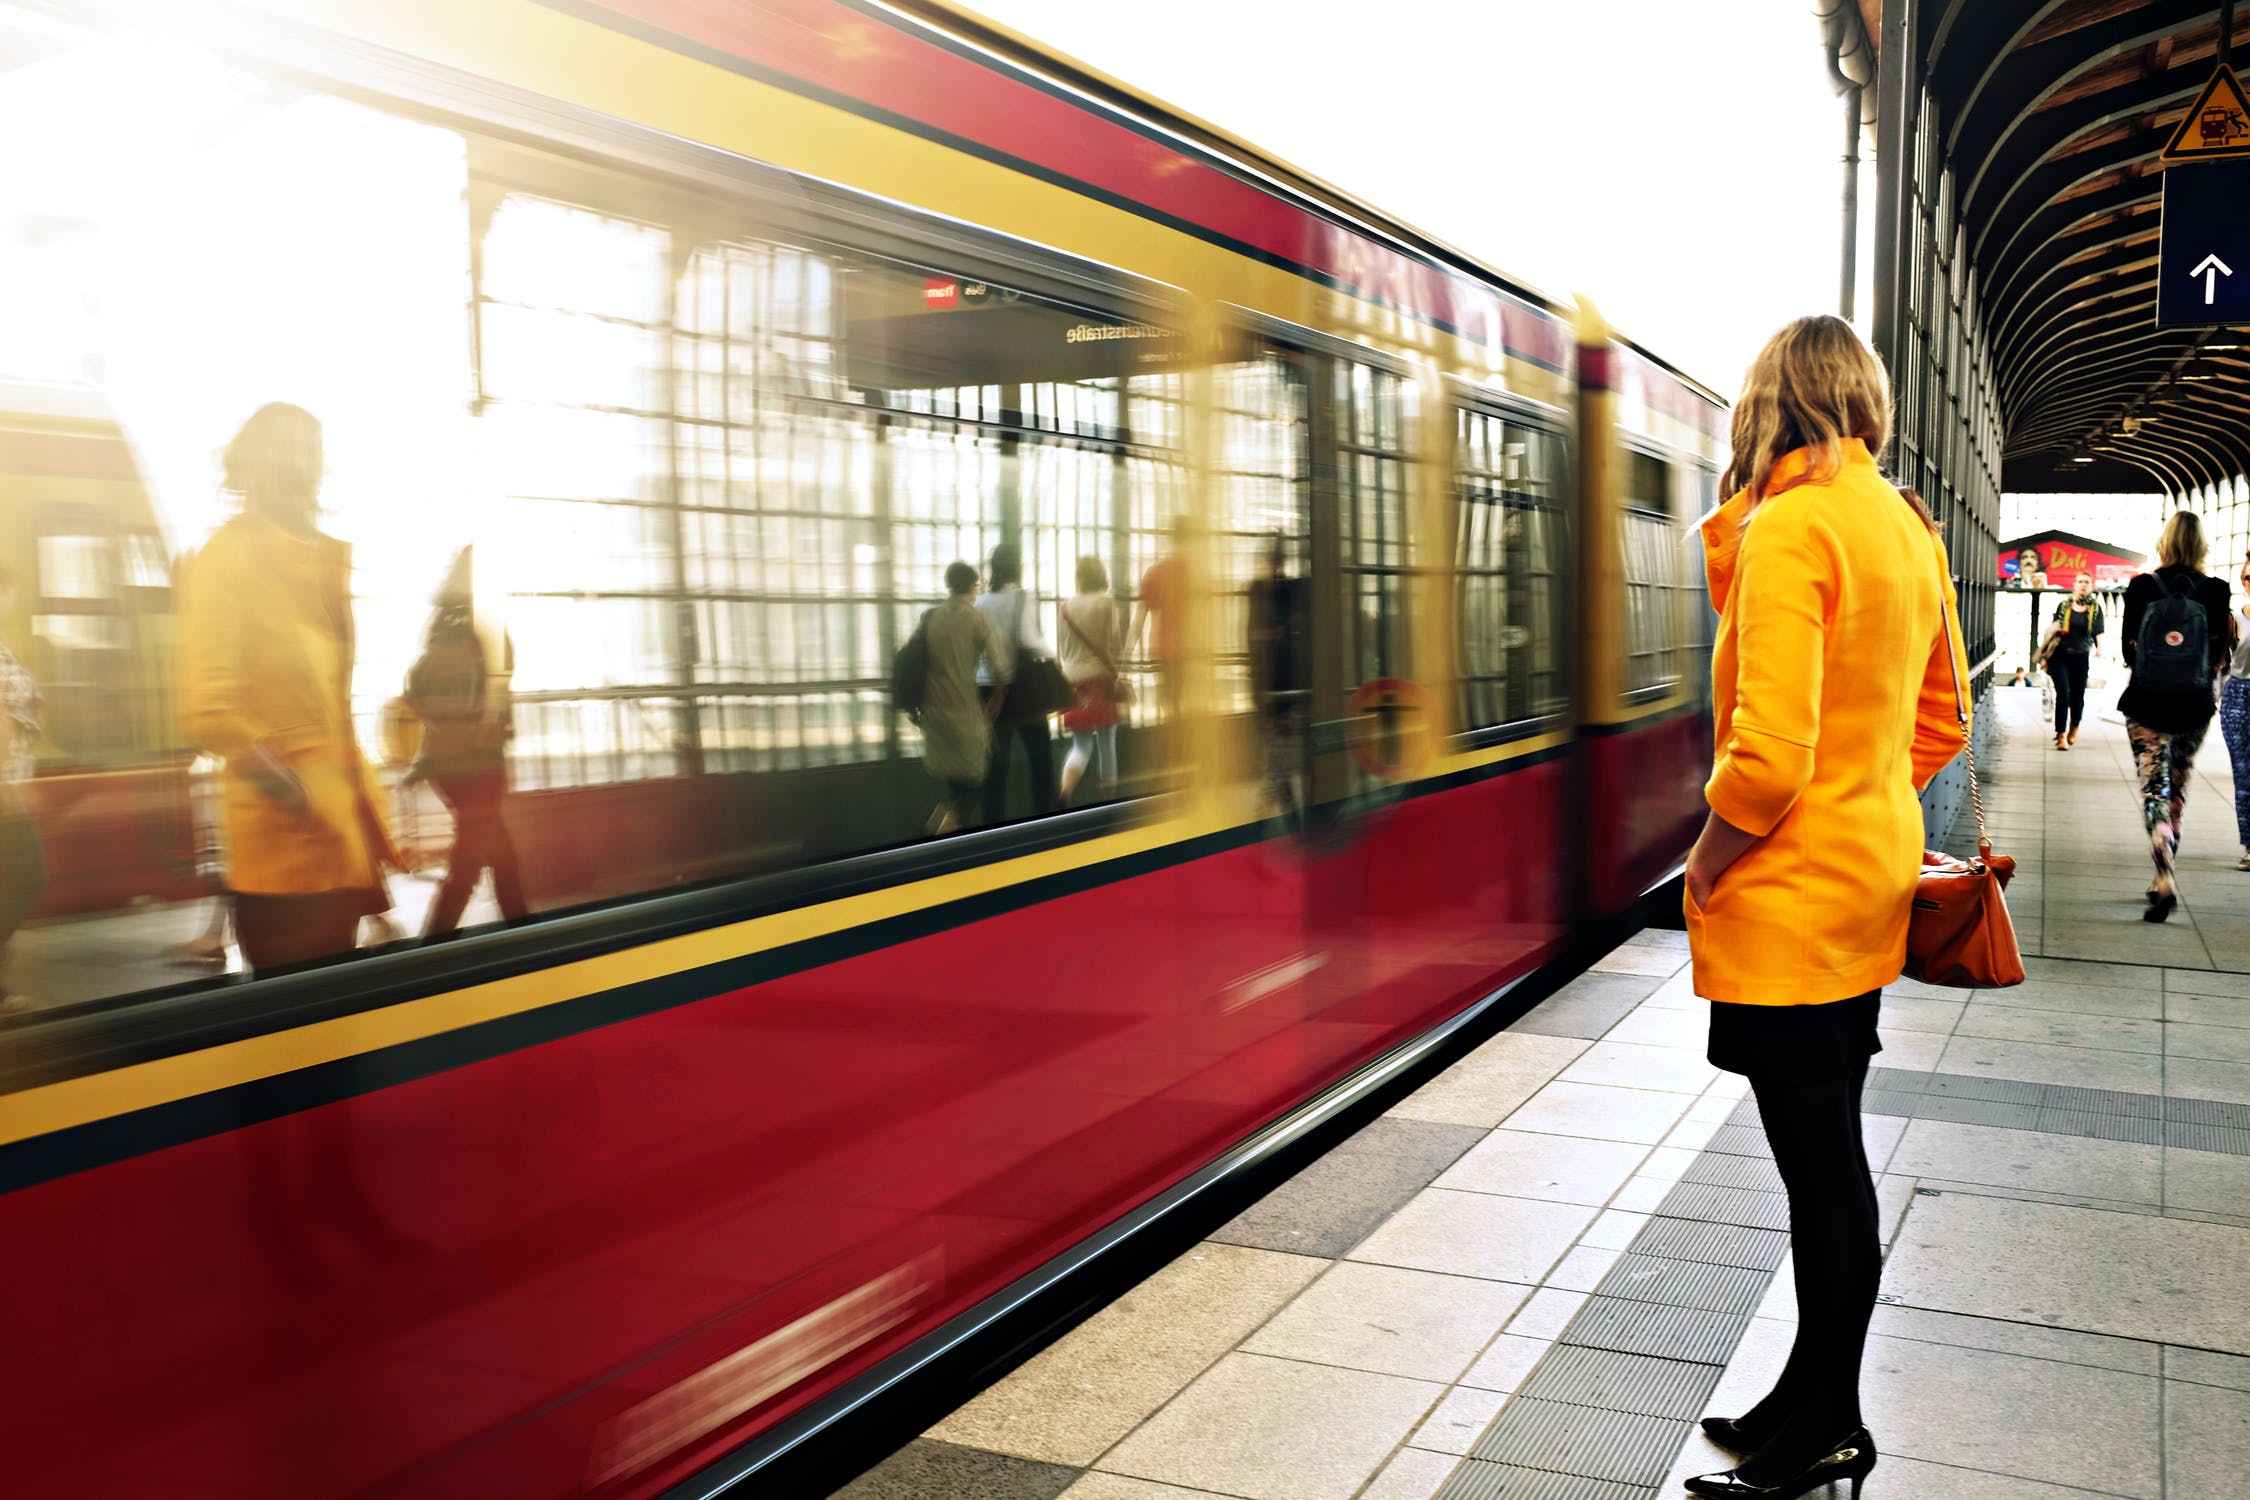 Tram and a woman standing on the platform in a yellow jacket